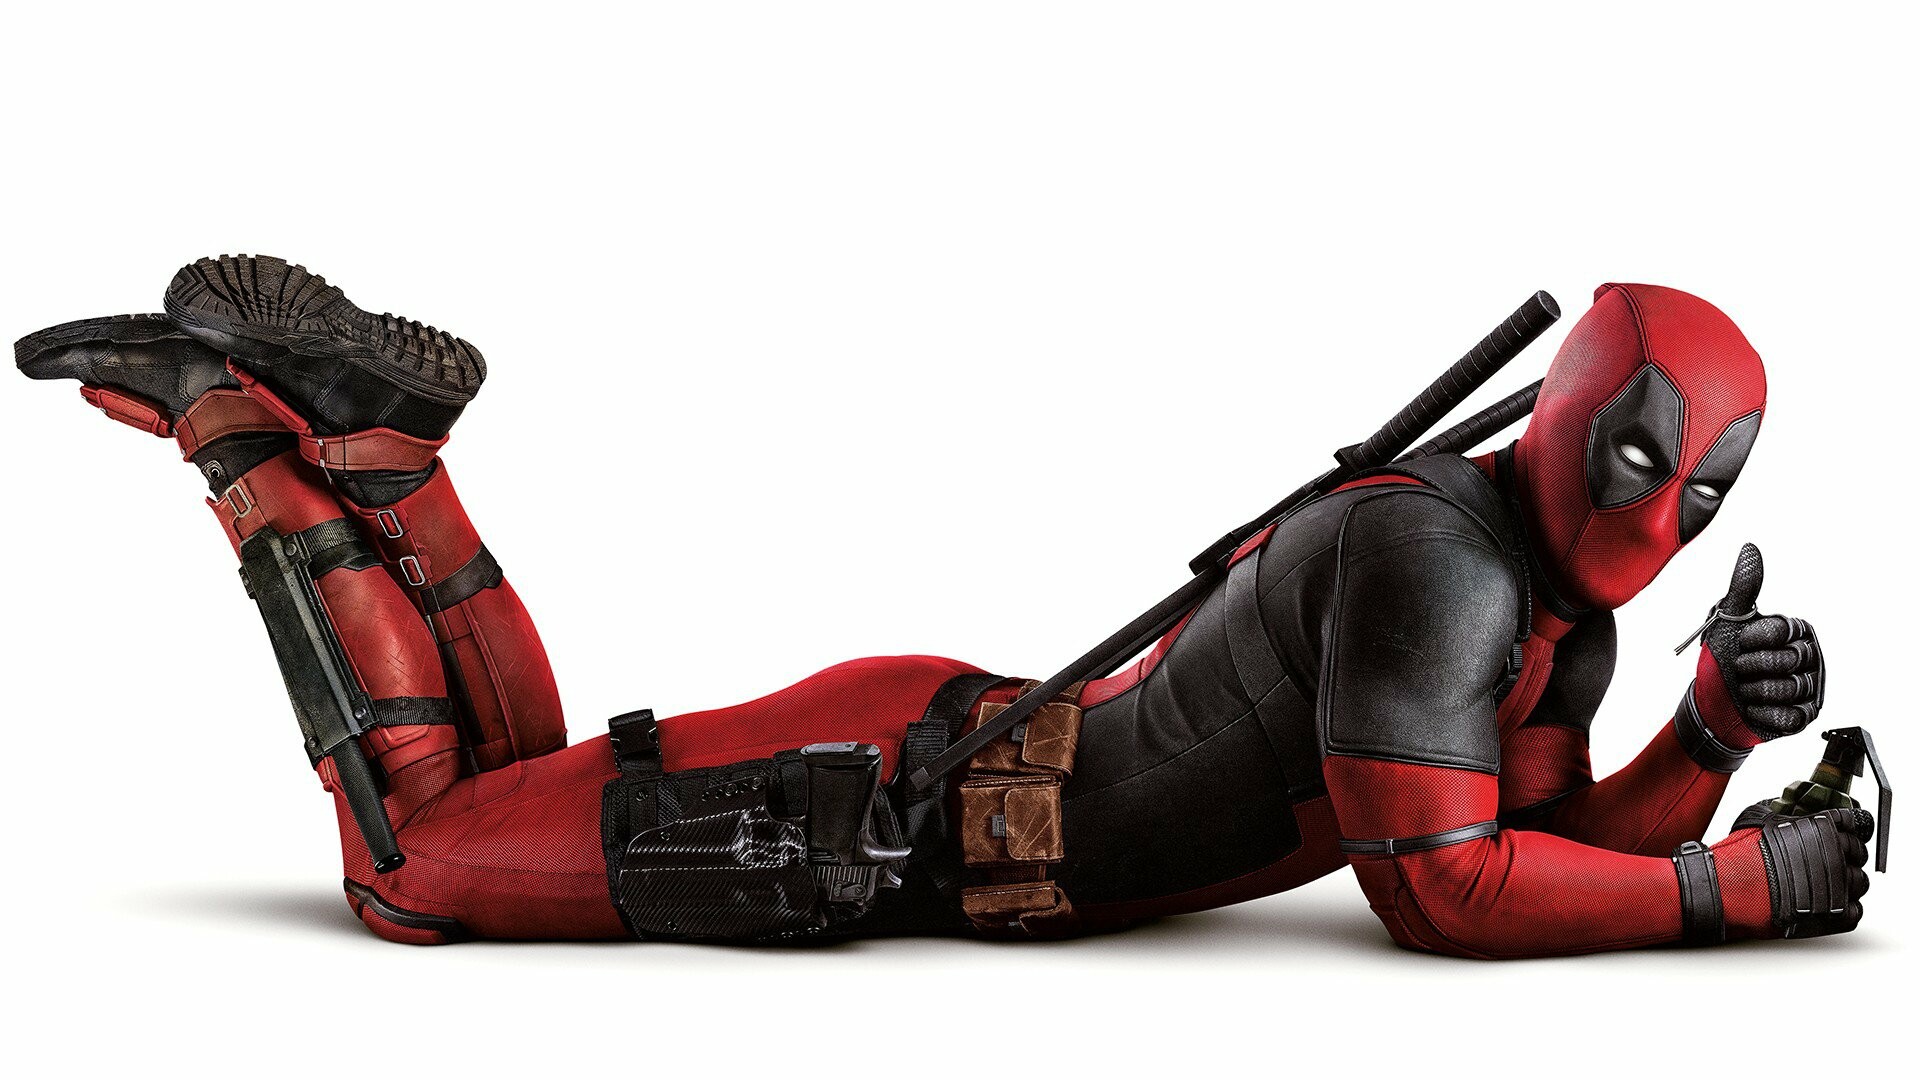 Deadpool: The film grossed $363.1 million in the United States and Canada and $420 million in other countries. 1920x1080 Full HD Wallpaper.